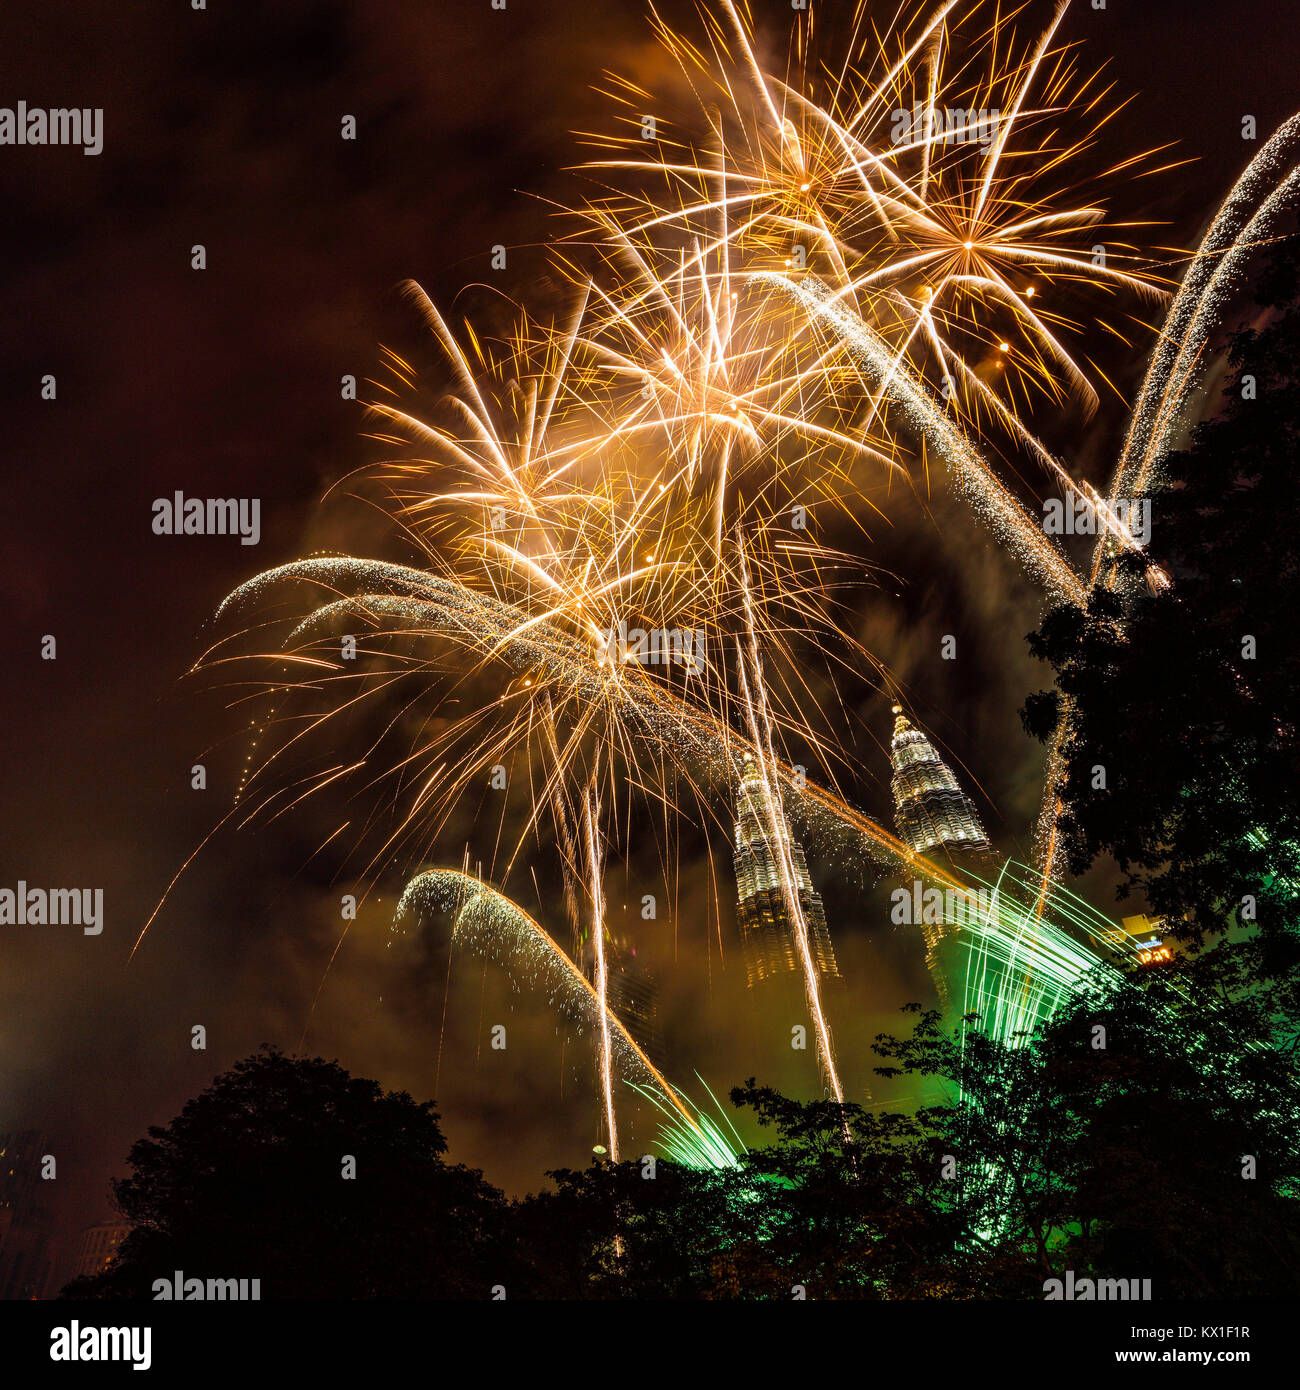 The New Year Fireworks at KLCC, Malaysia. Stock Photo